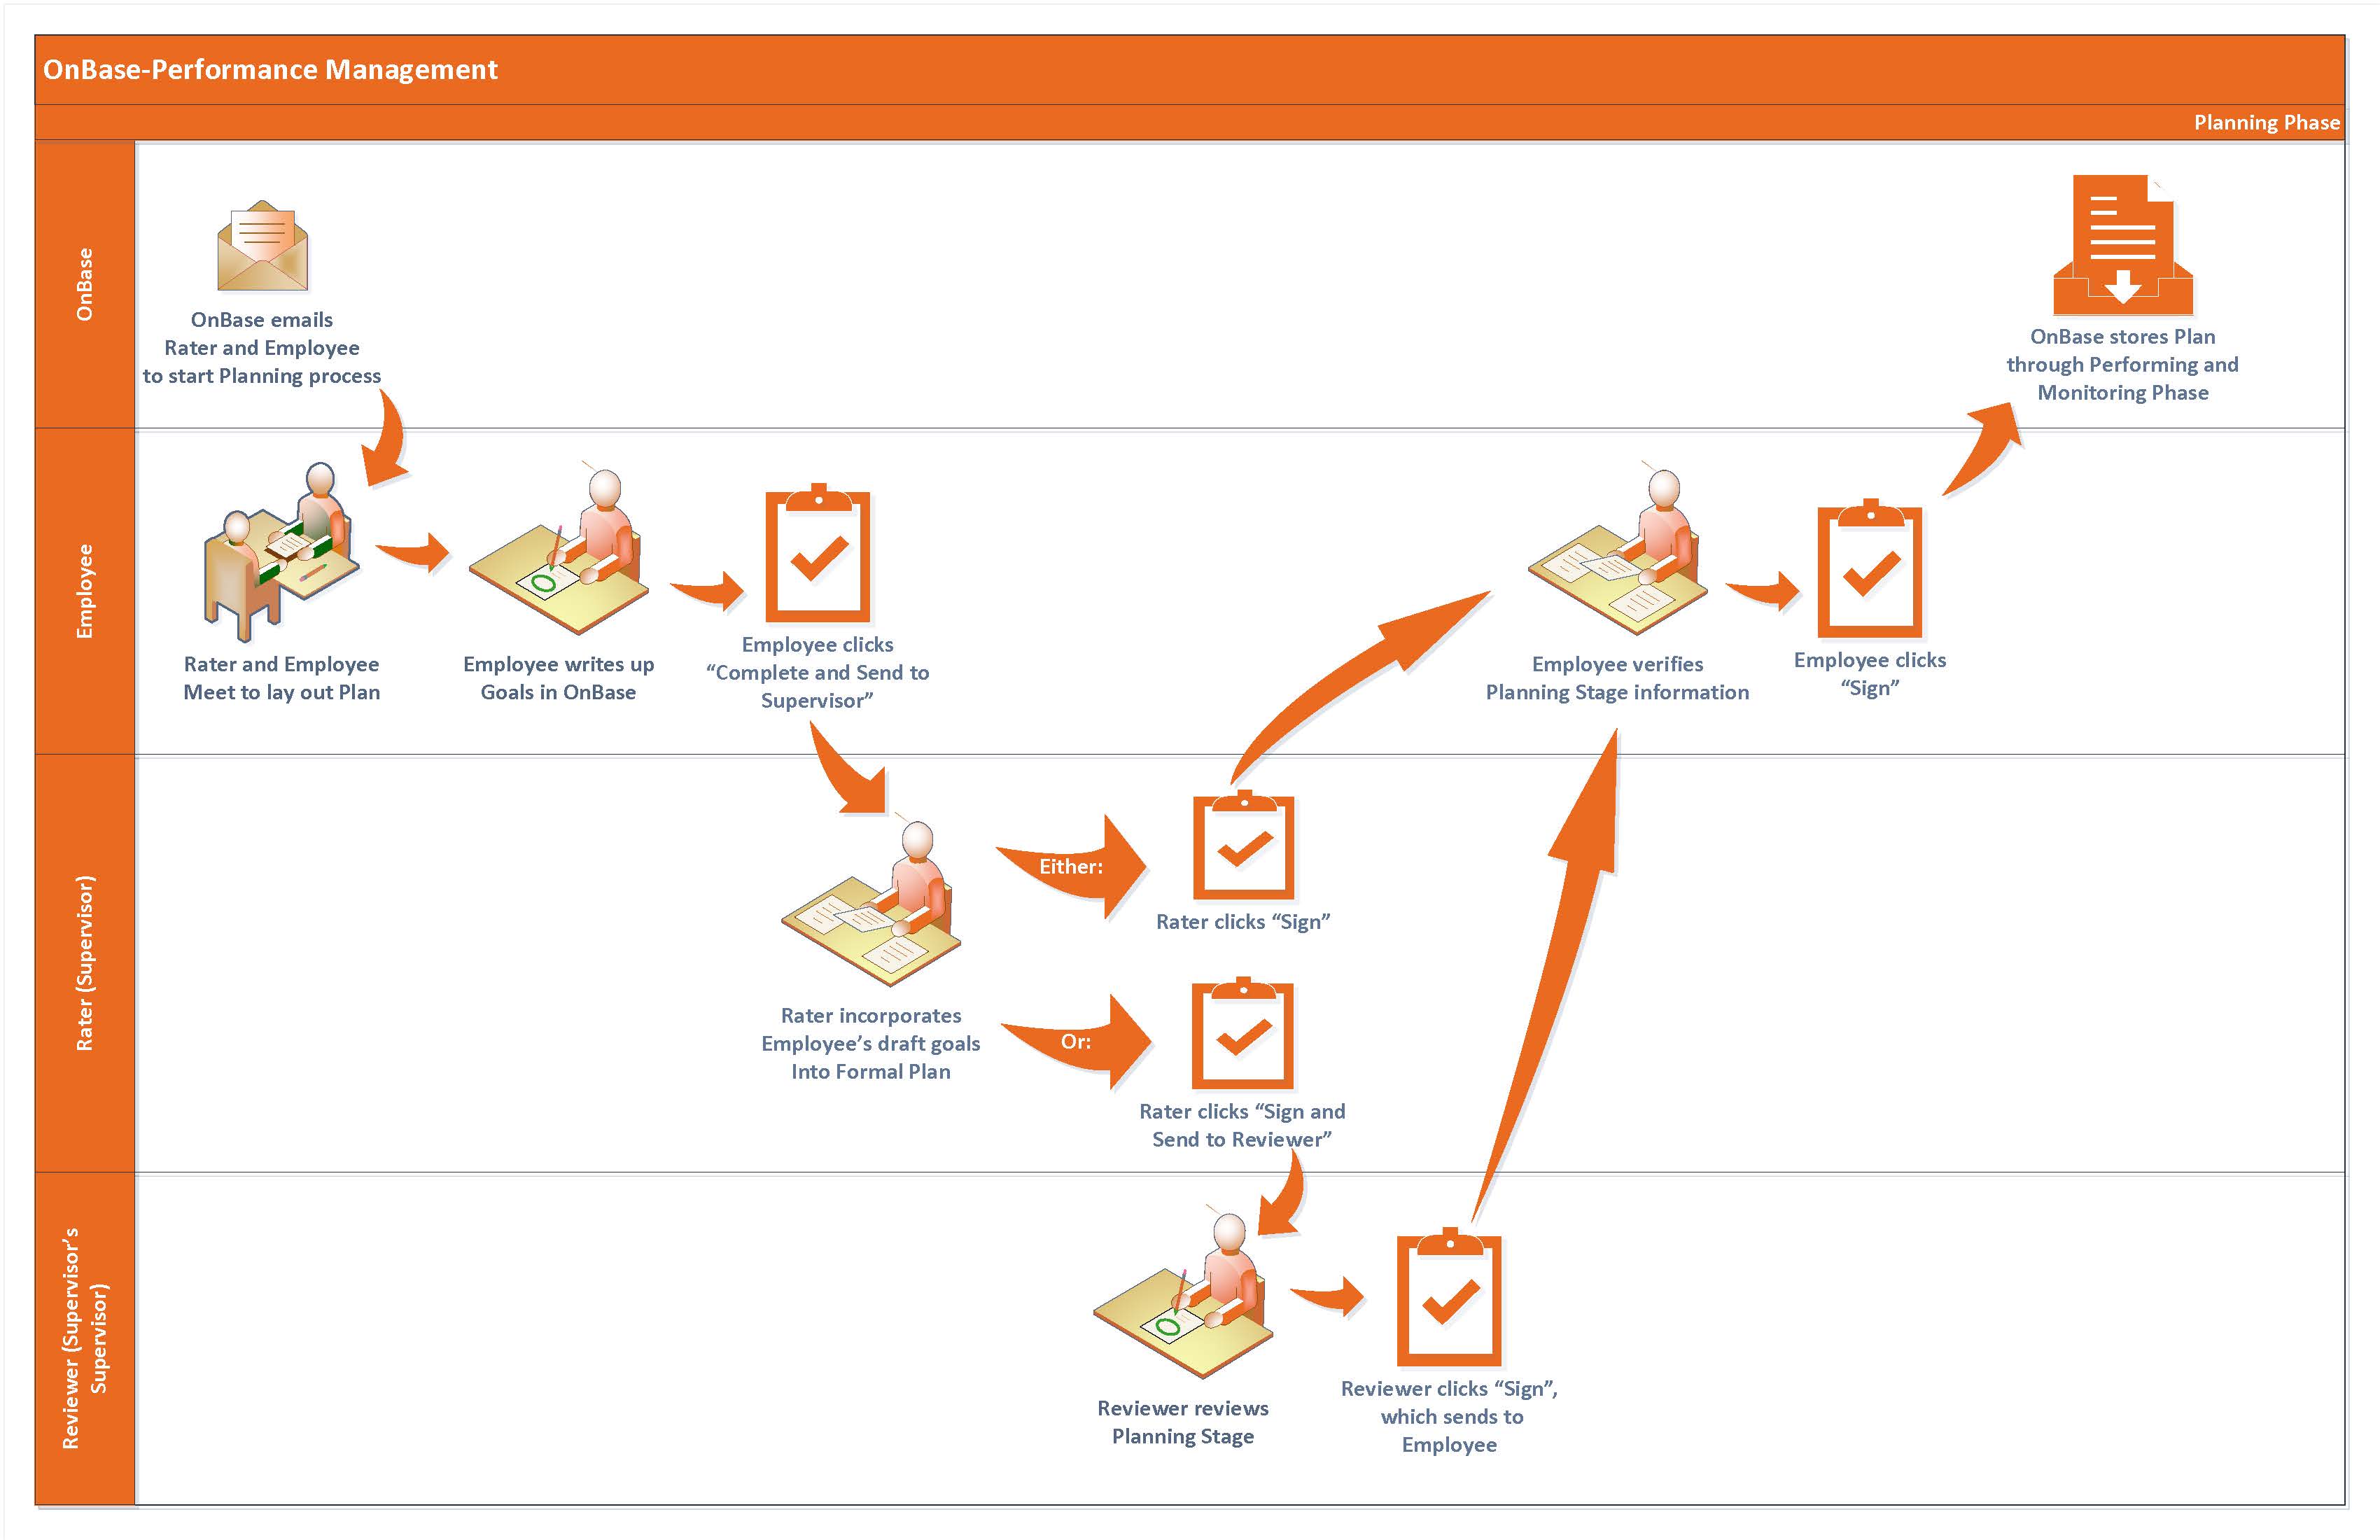 Chart showing the steps of the OnBase-Performance Planning Phase, described in detail below.